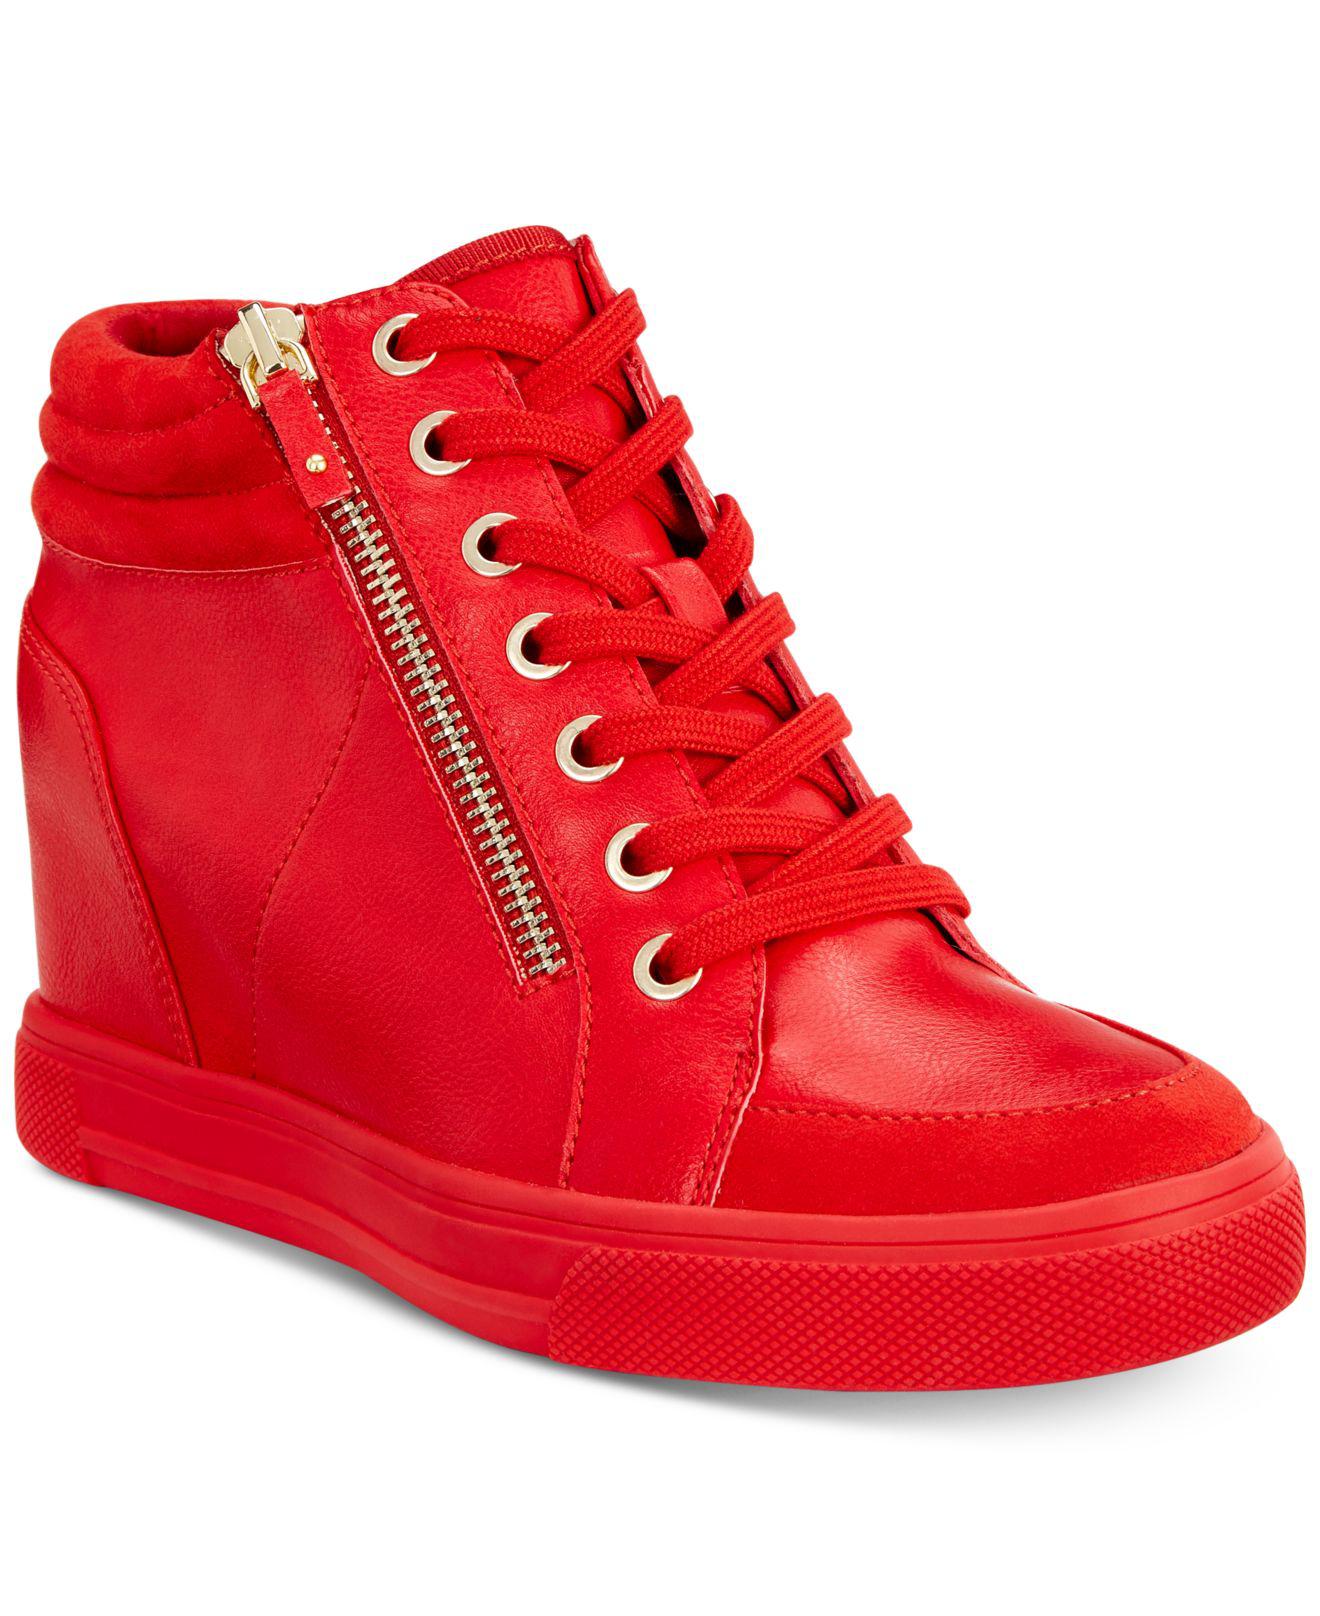 Quagmire Gentage sig niece ALDO Kaia Lace-up Wedge Sneakers in Red | Lyst